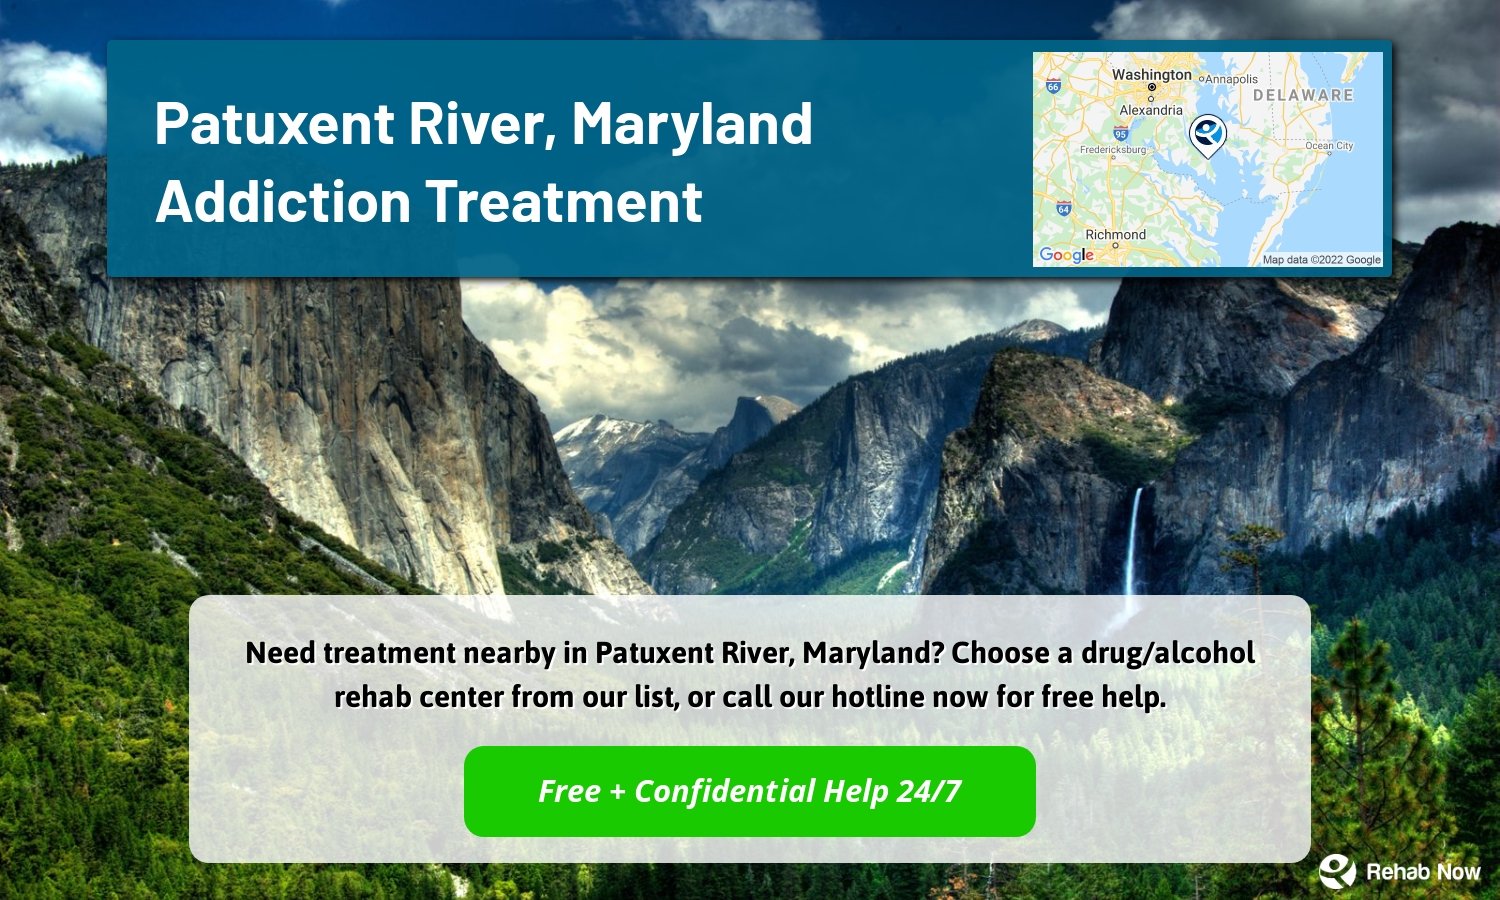 Need treatment nearby in Patuxent River, Maryland? Choose a drug/alcohol rehab center from our list, or call our hotline now for free help.